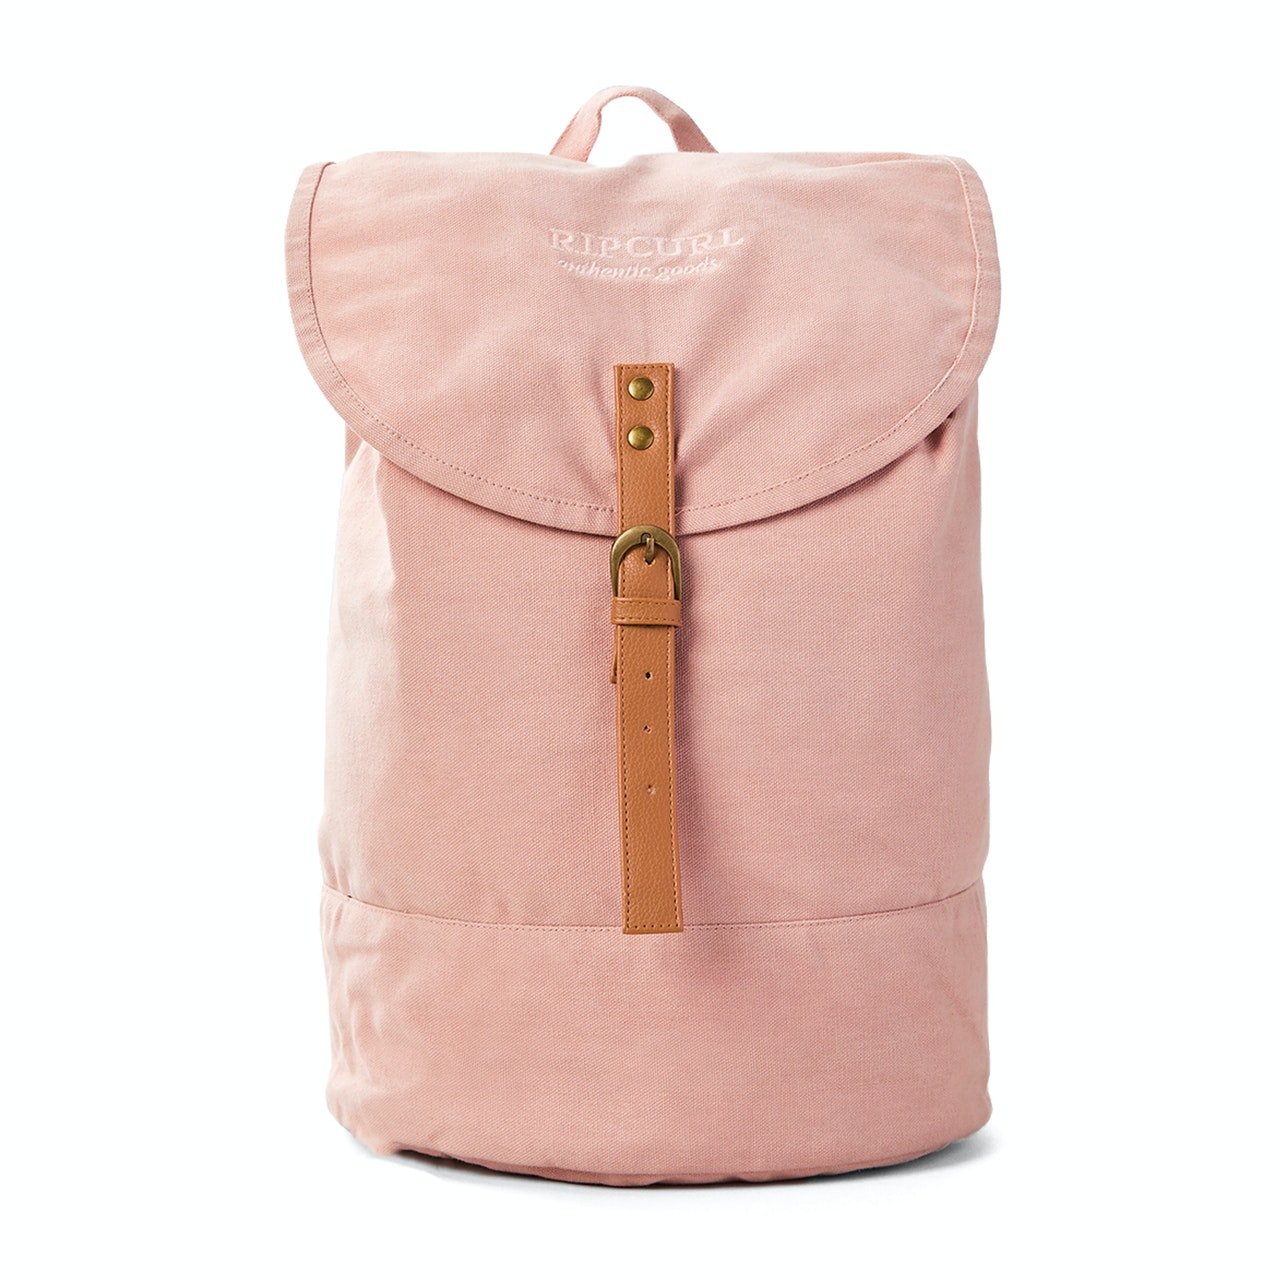 Rip Curl Waxed Canvas 18l Womens Backpack - Dusk Pink